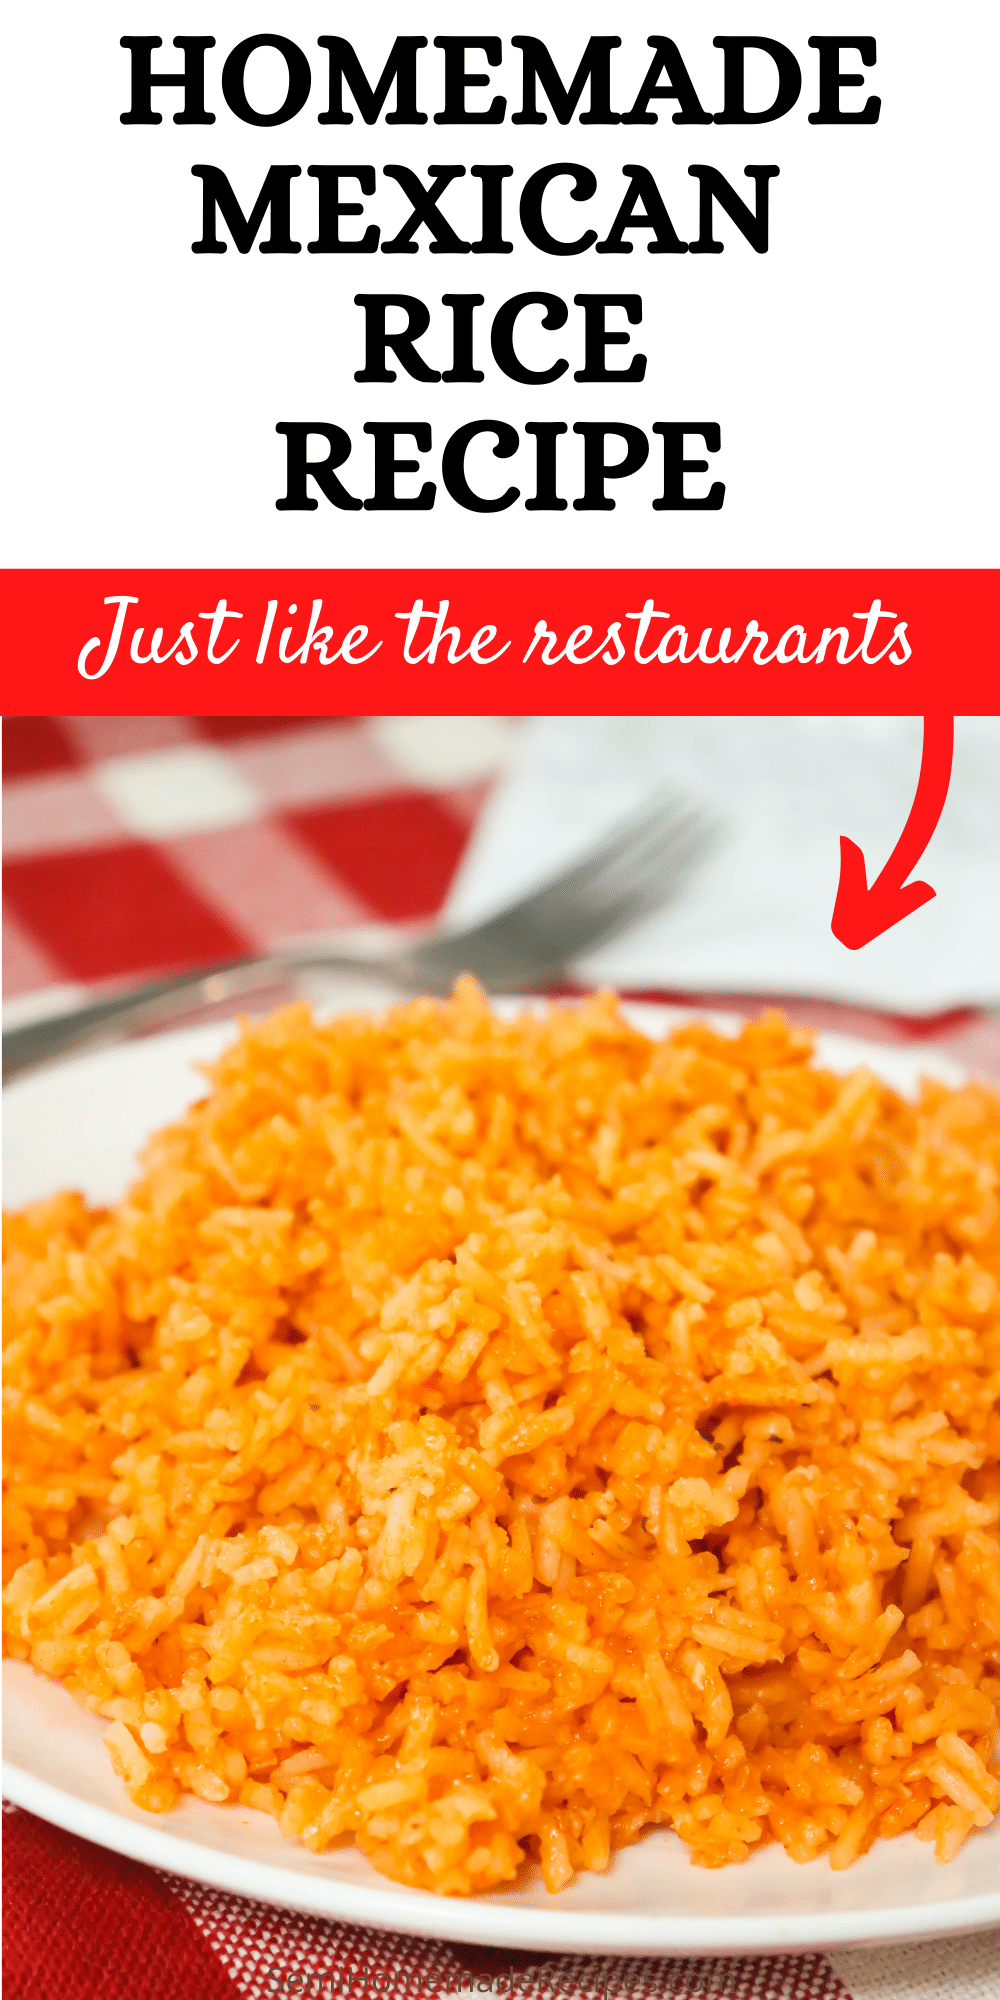 Homemade Mexican rice is so easy to make and taste just like the rice from the Mexican restaurants! You'll love this homemade version that is perfect for serving with enchiladas, tacos, chicken, shrimp or just with a side of queso!  via @bigbearswife